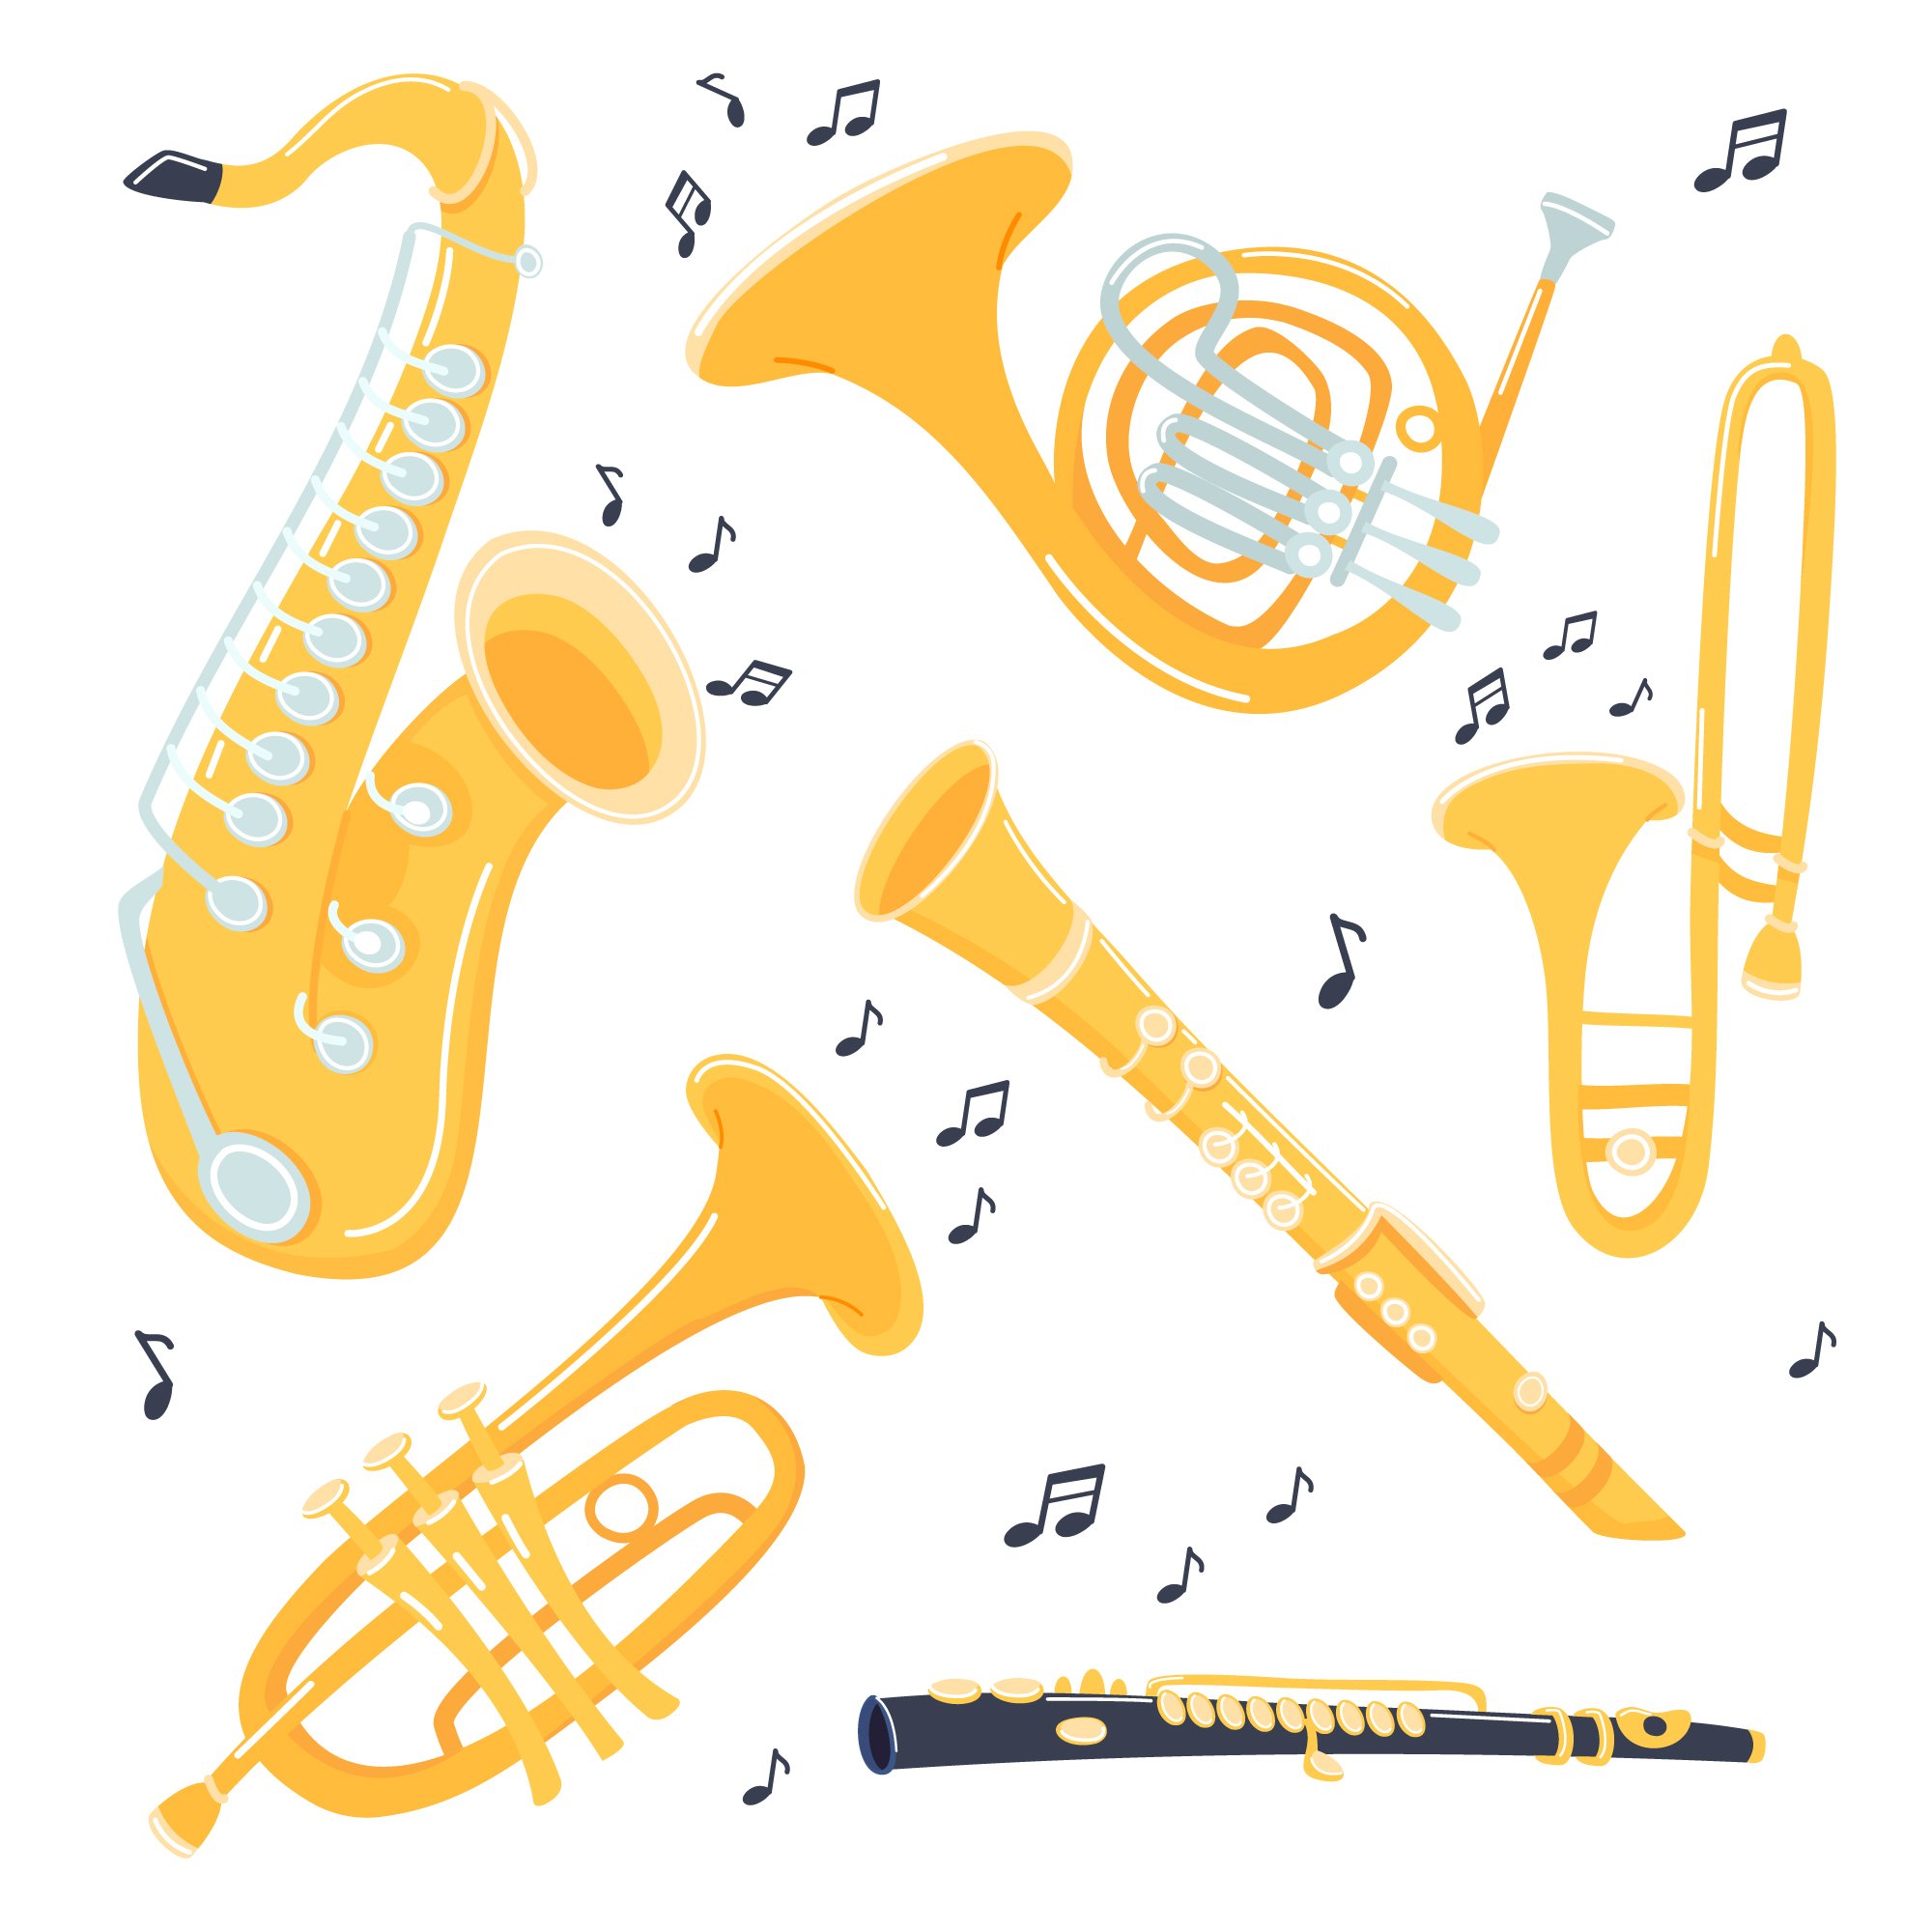 Musical Jazz instrument preview image.